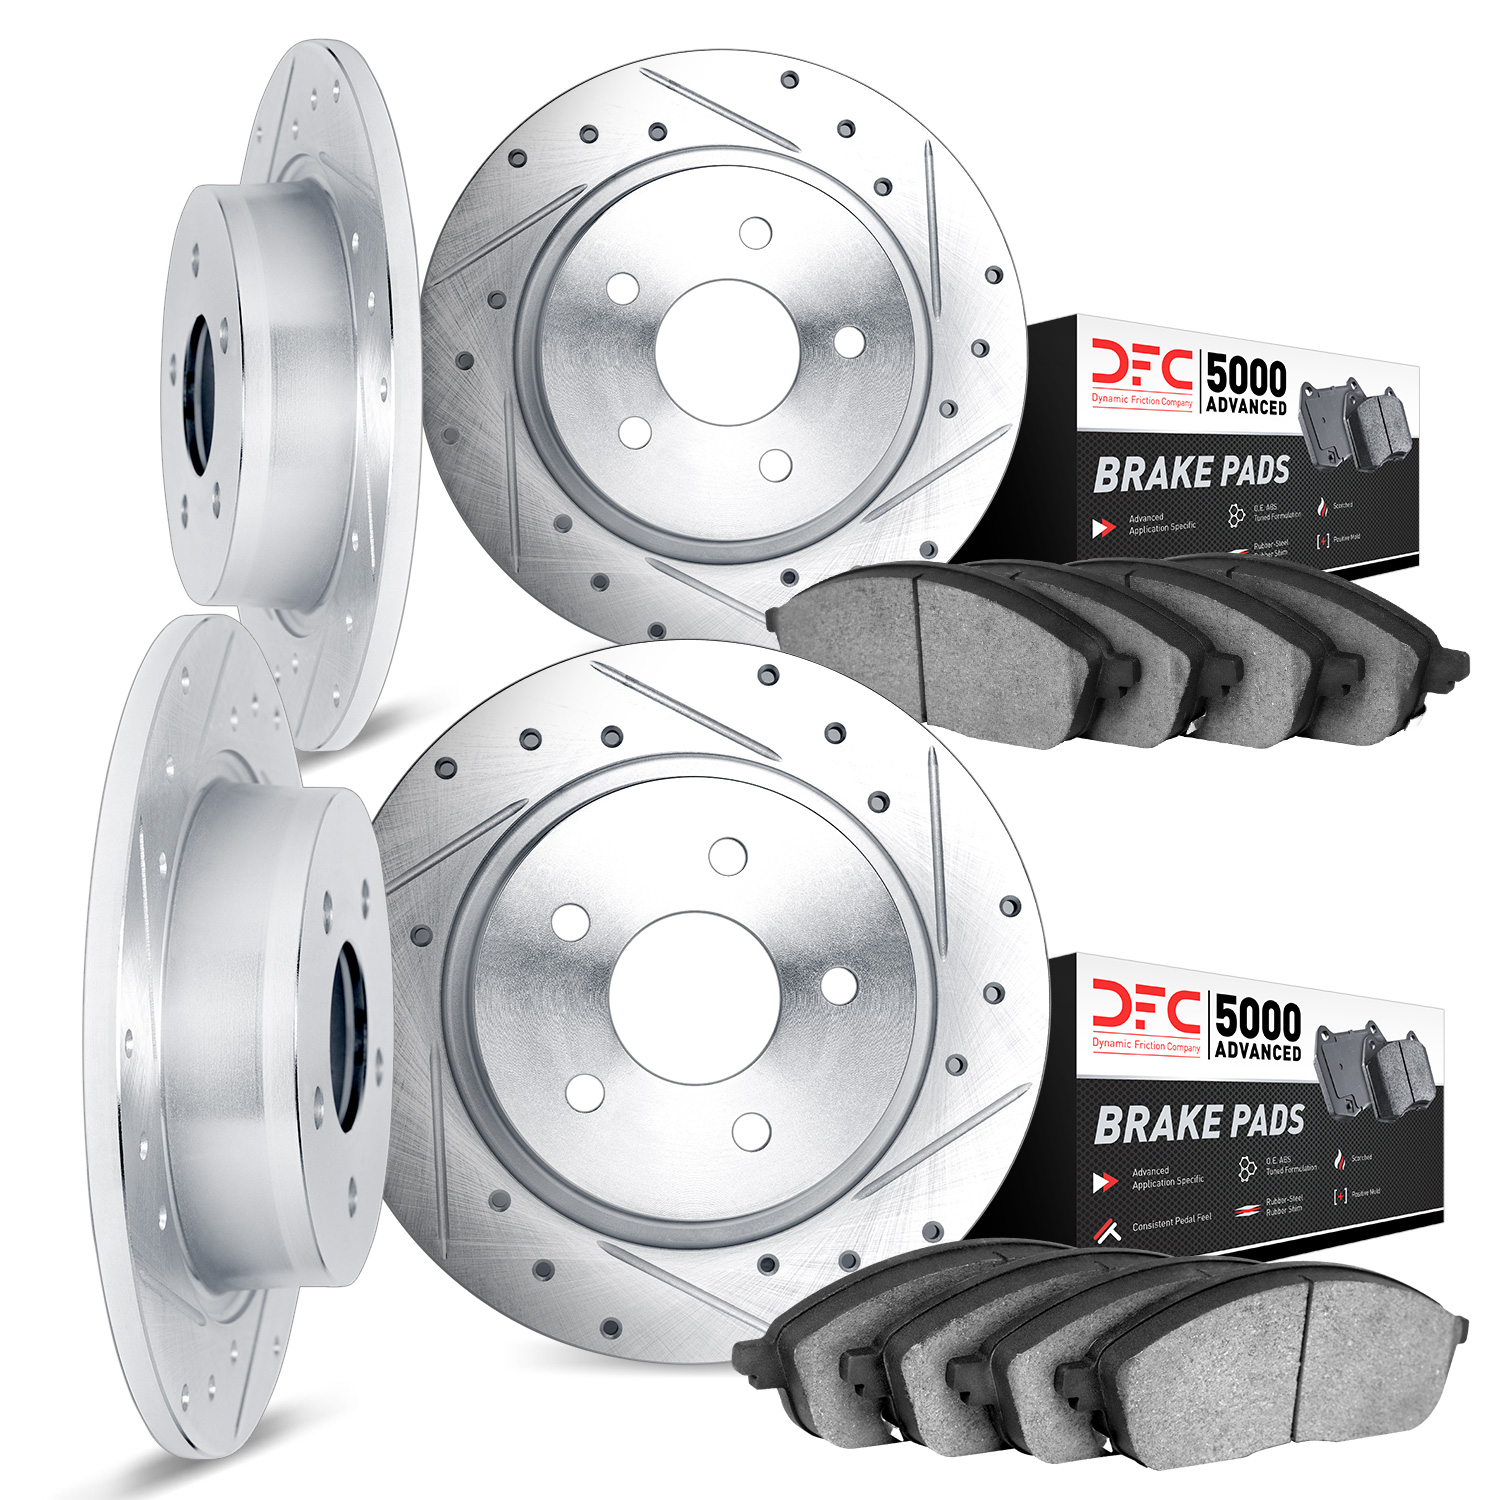 7504-11004 Drilled/Slotted Brake Rotors w/5000 Advanced Brake Pads Kit [Silver], 1987-1989 Land Rover, Position: Front and Rear